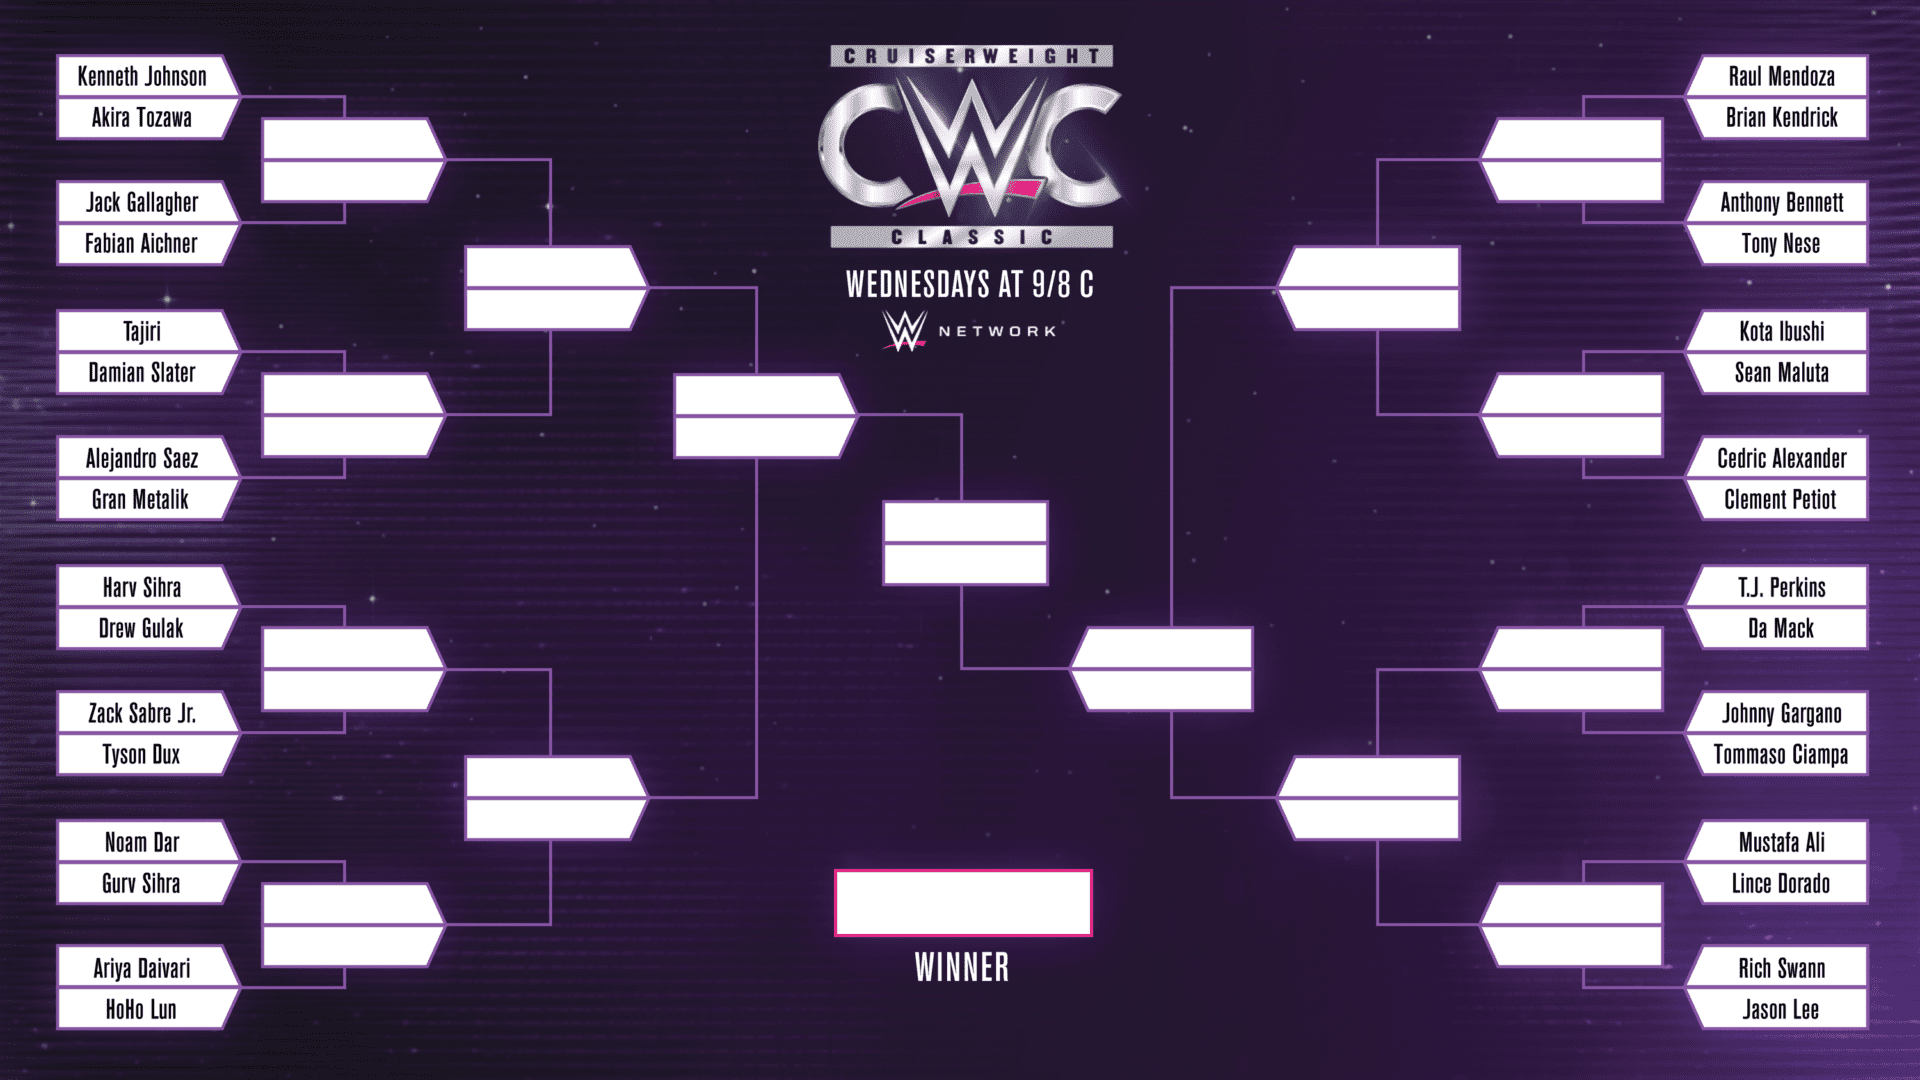 Full Brackets Revealed for WWE Cruiserweight Classic CWC - High Resolution ...